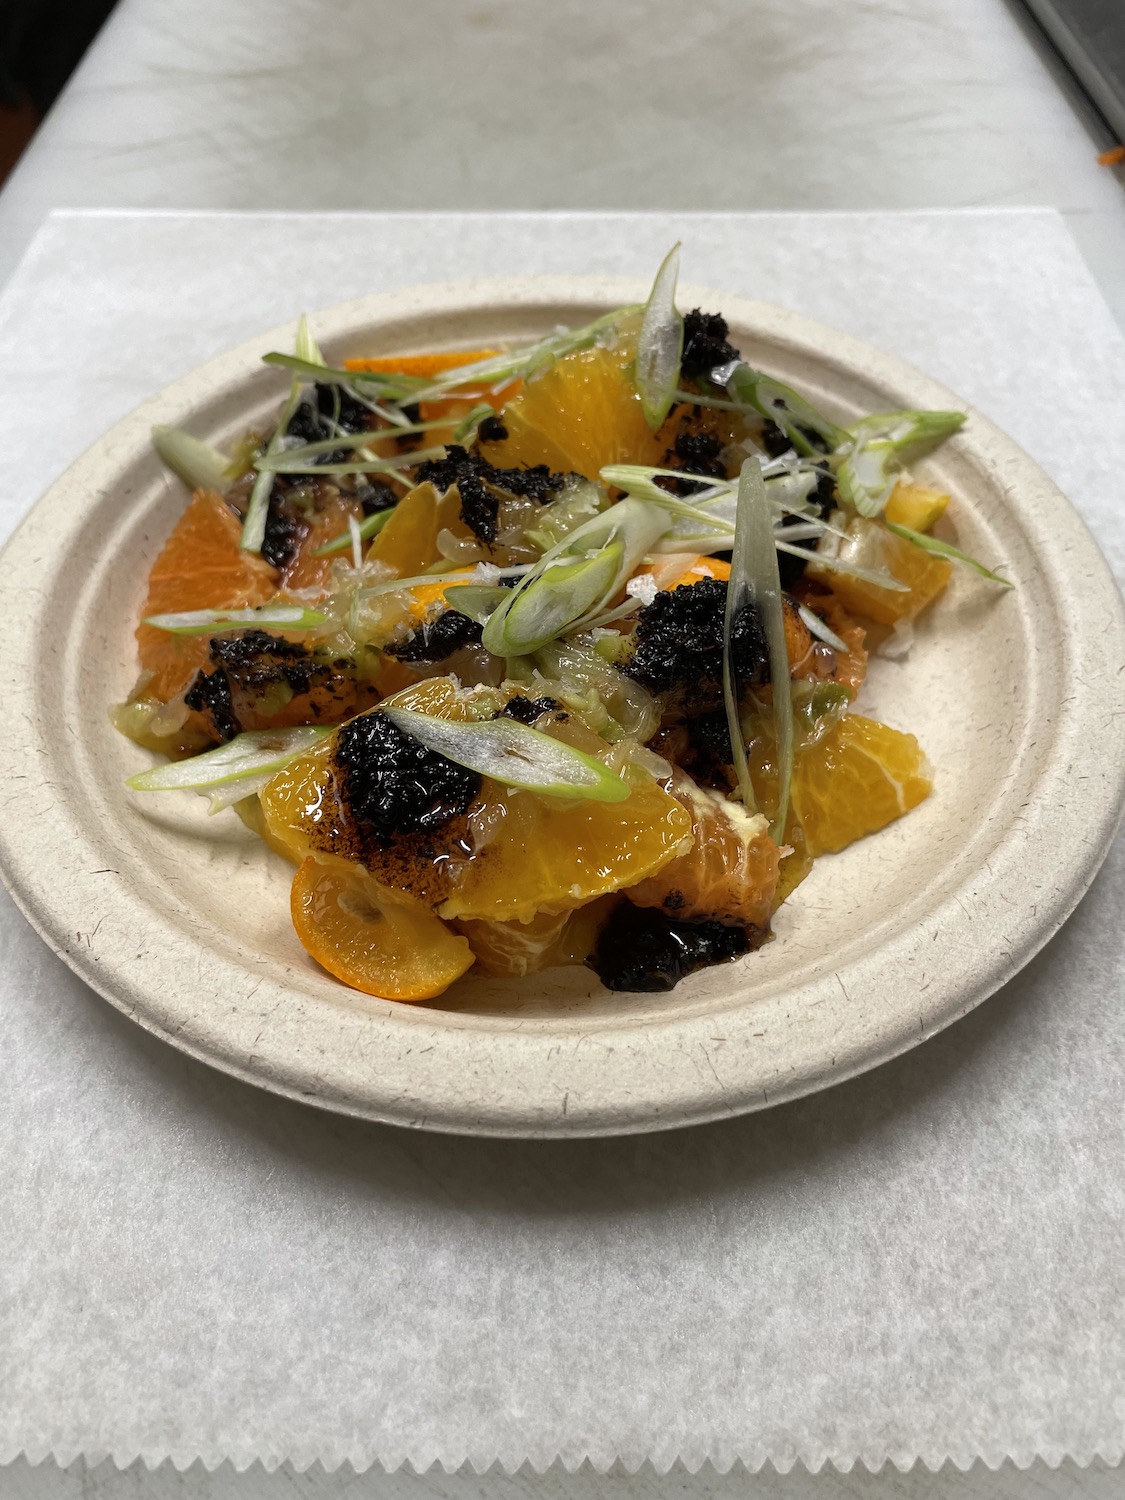 citrus salad with xo from fat choy in nyc